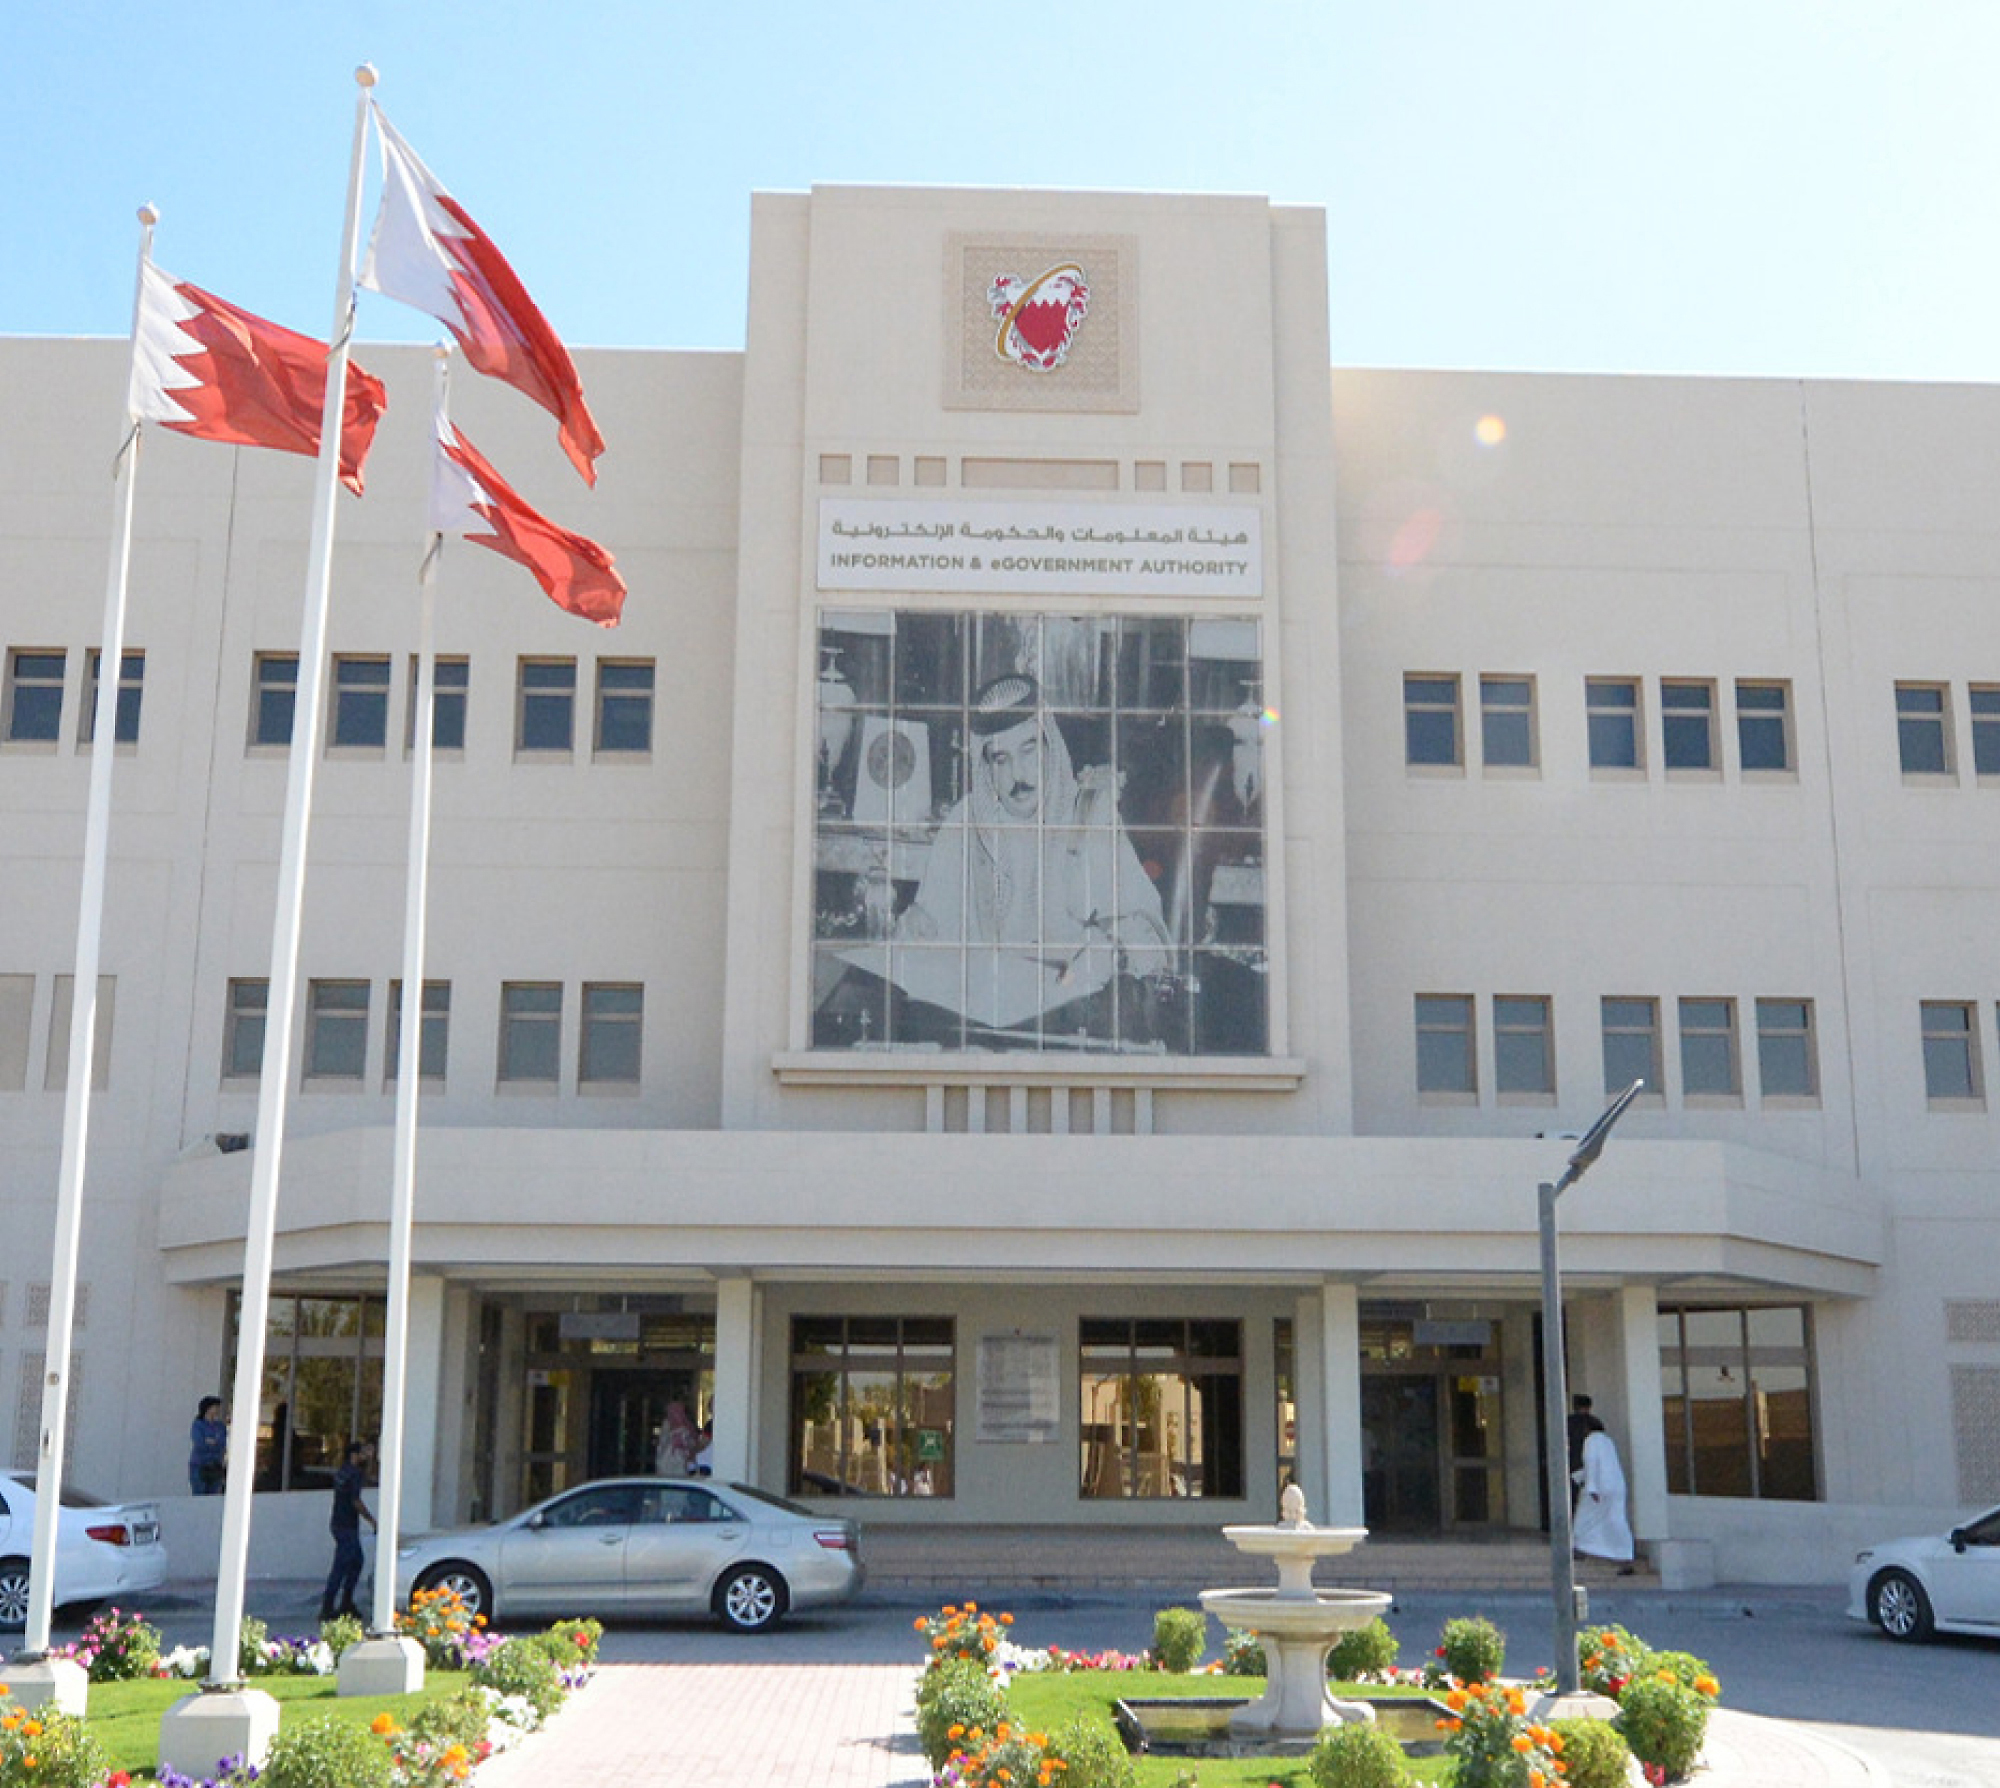 Front view of the information & egovernment authority building in bahrain, displaying the national flag